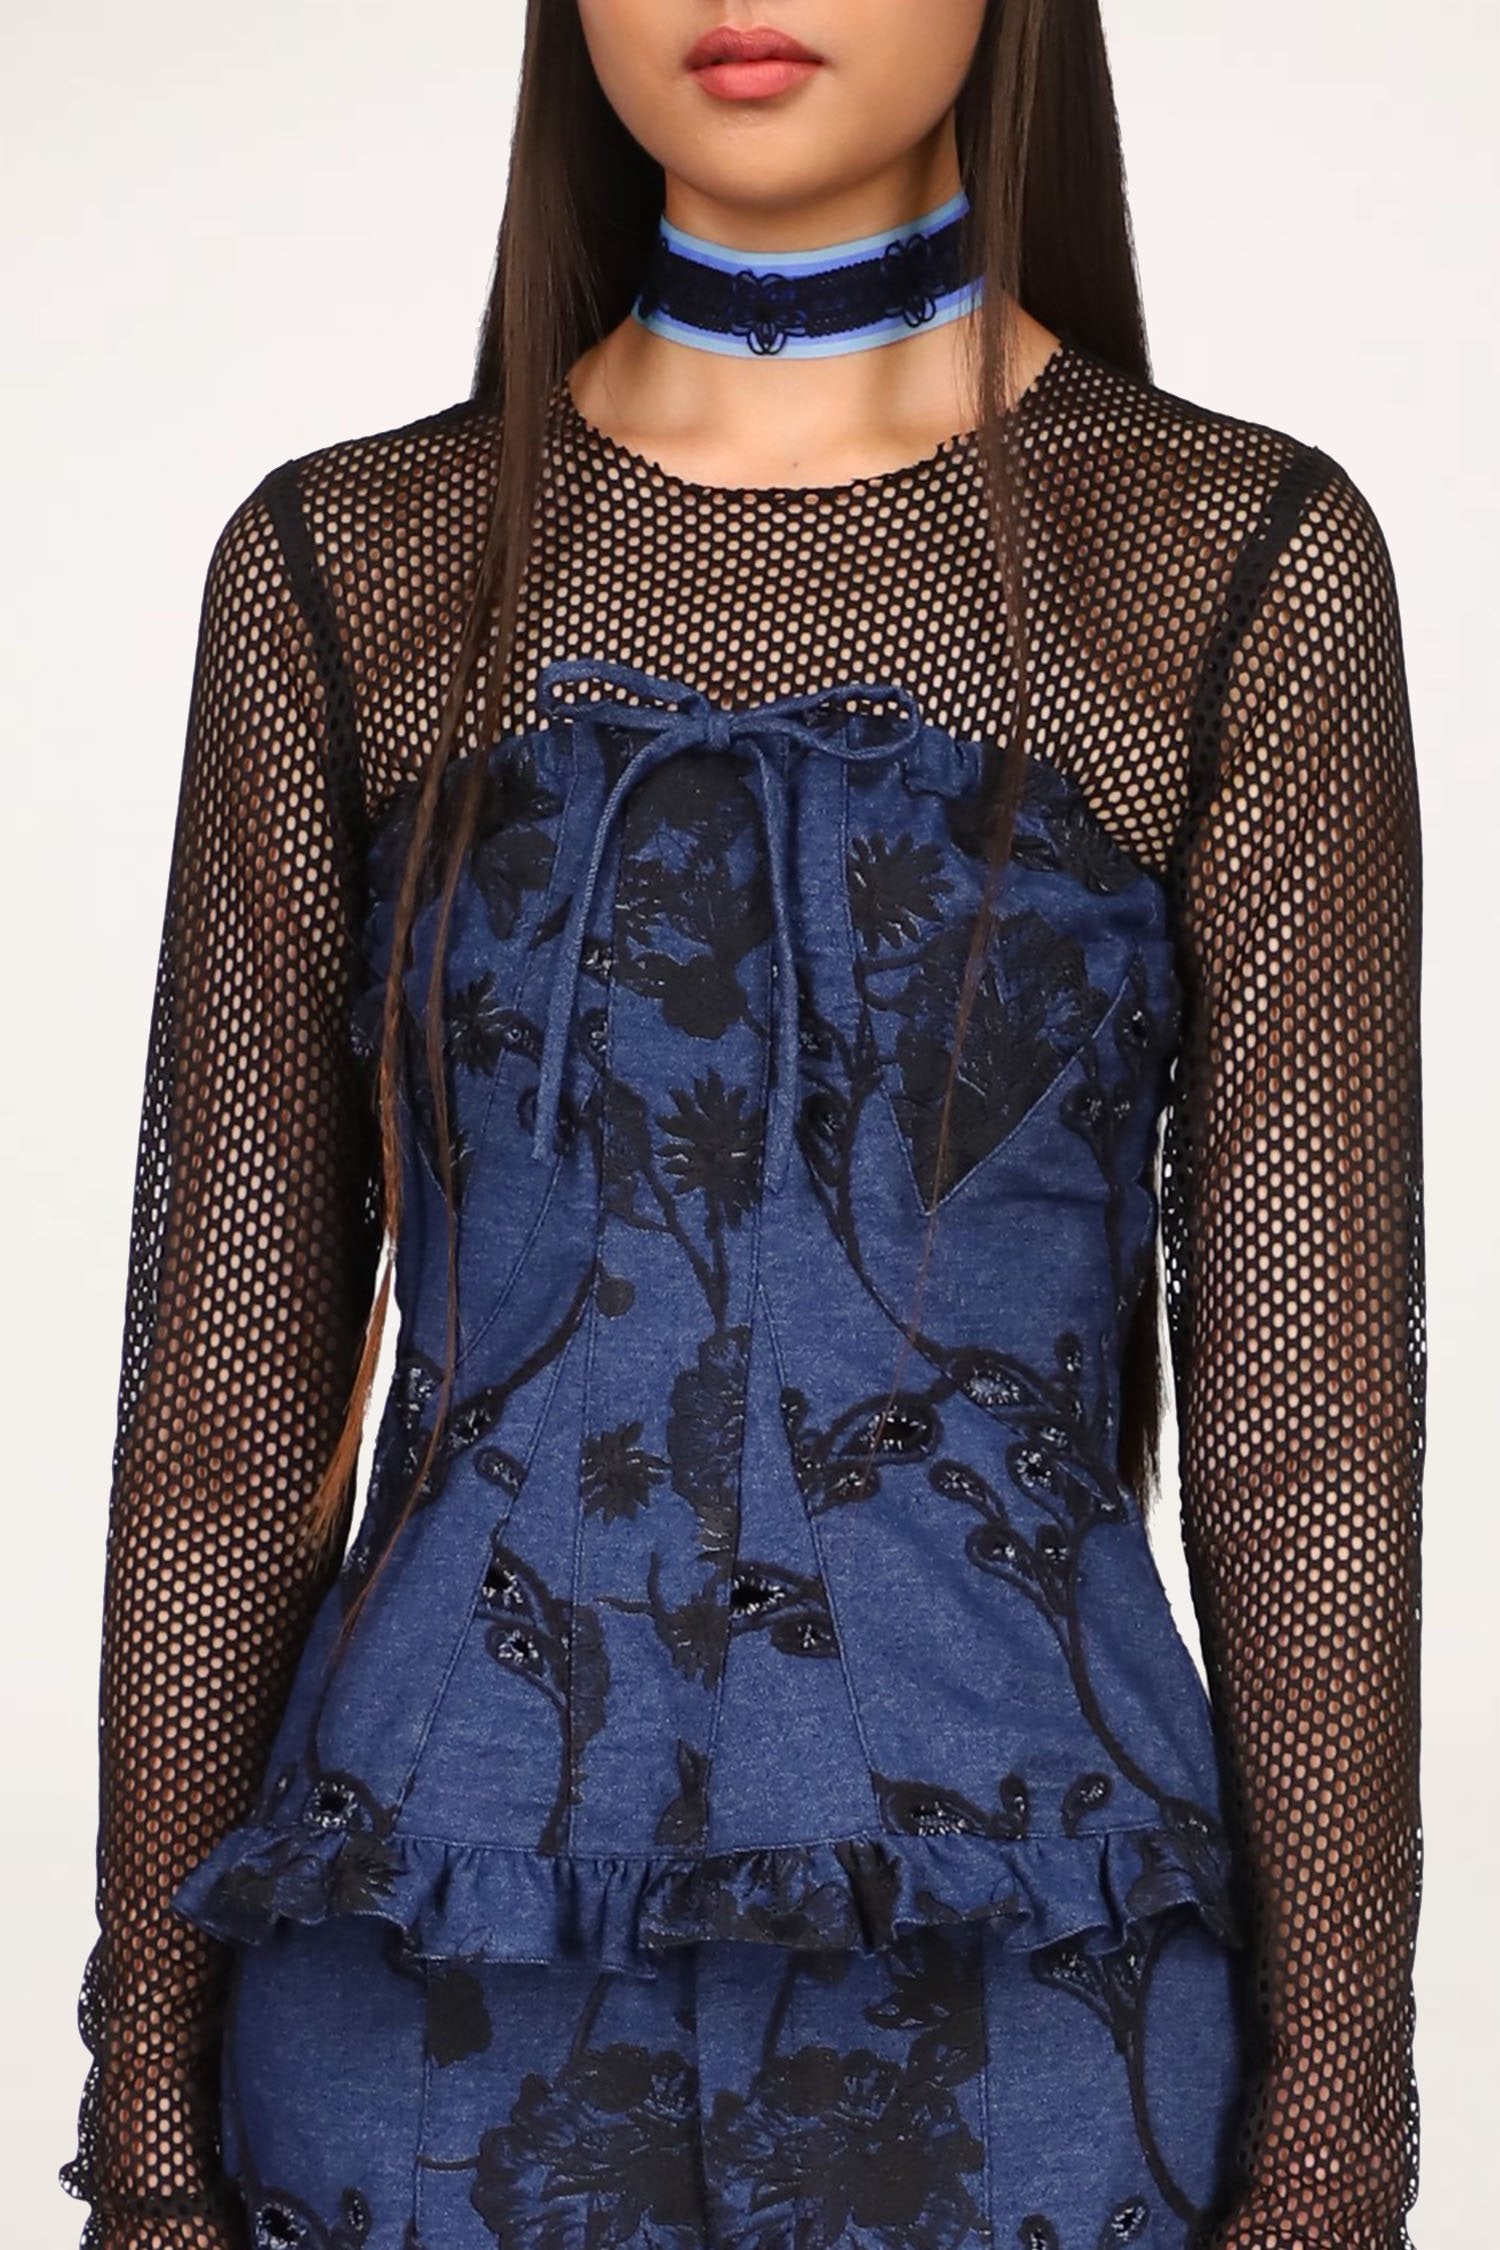 Denim Eyelet Embroidery Corset - Anna Sui